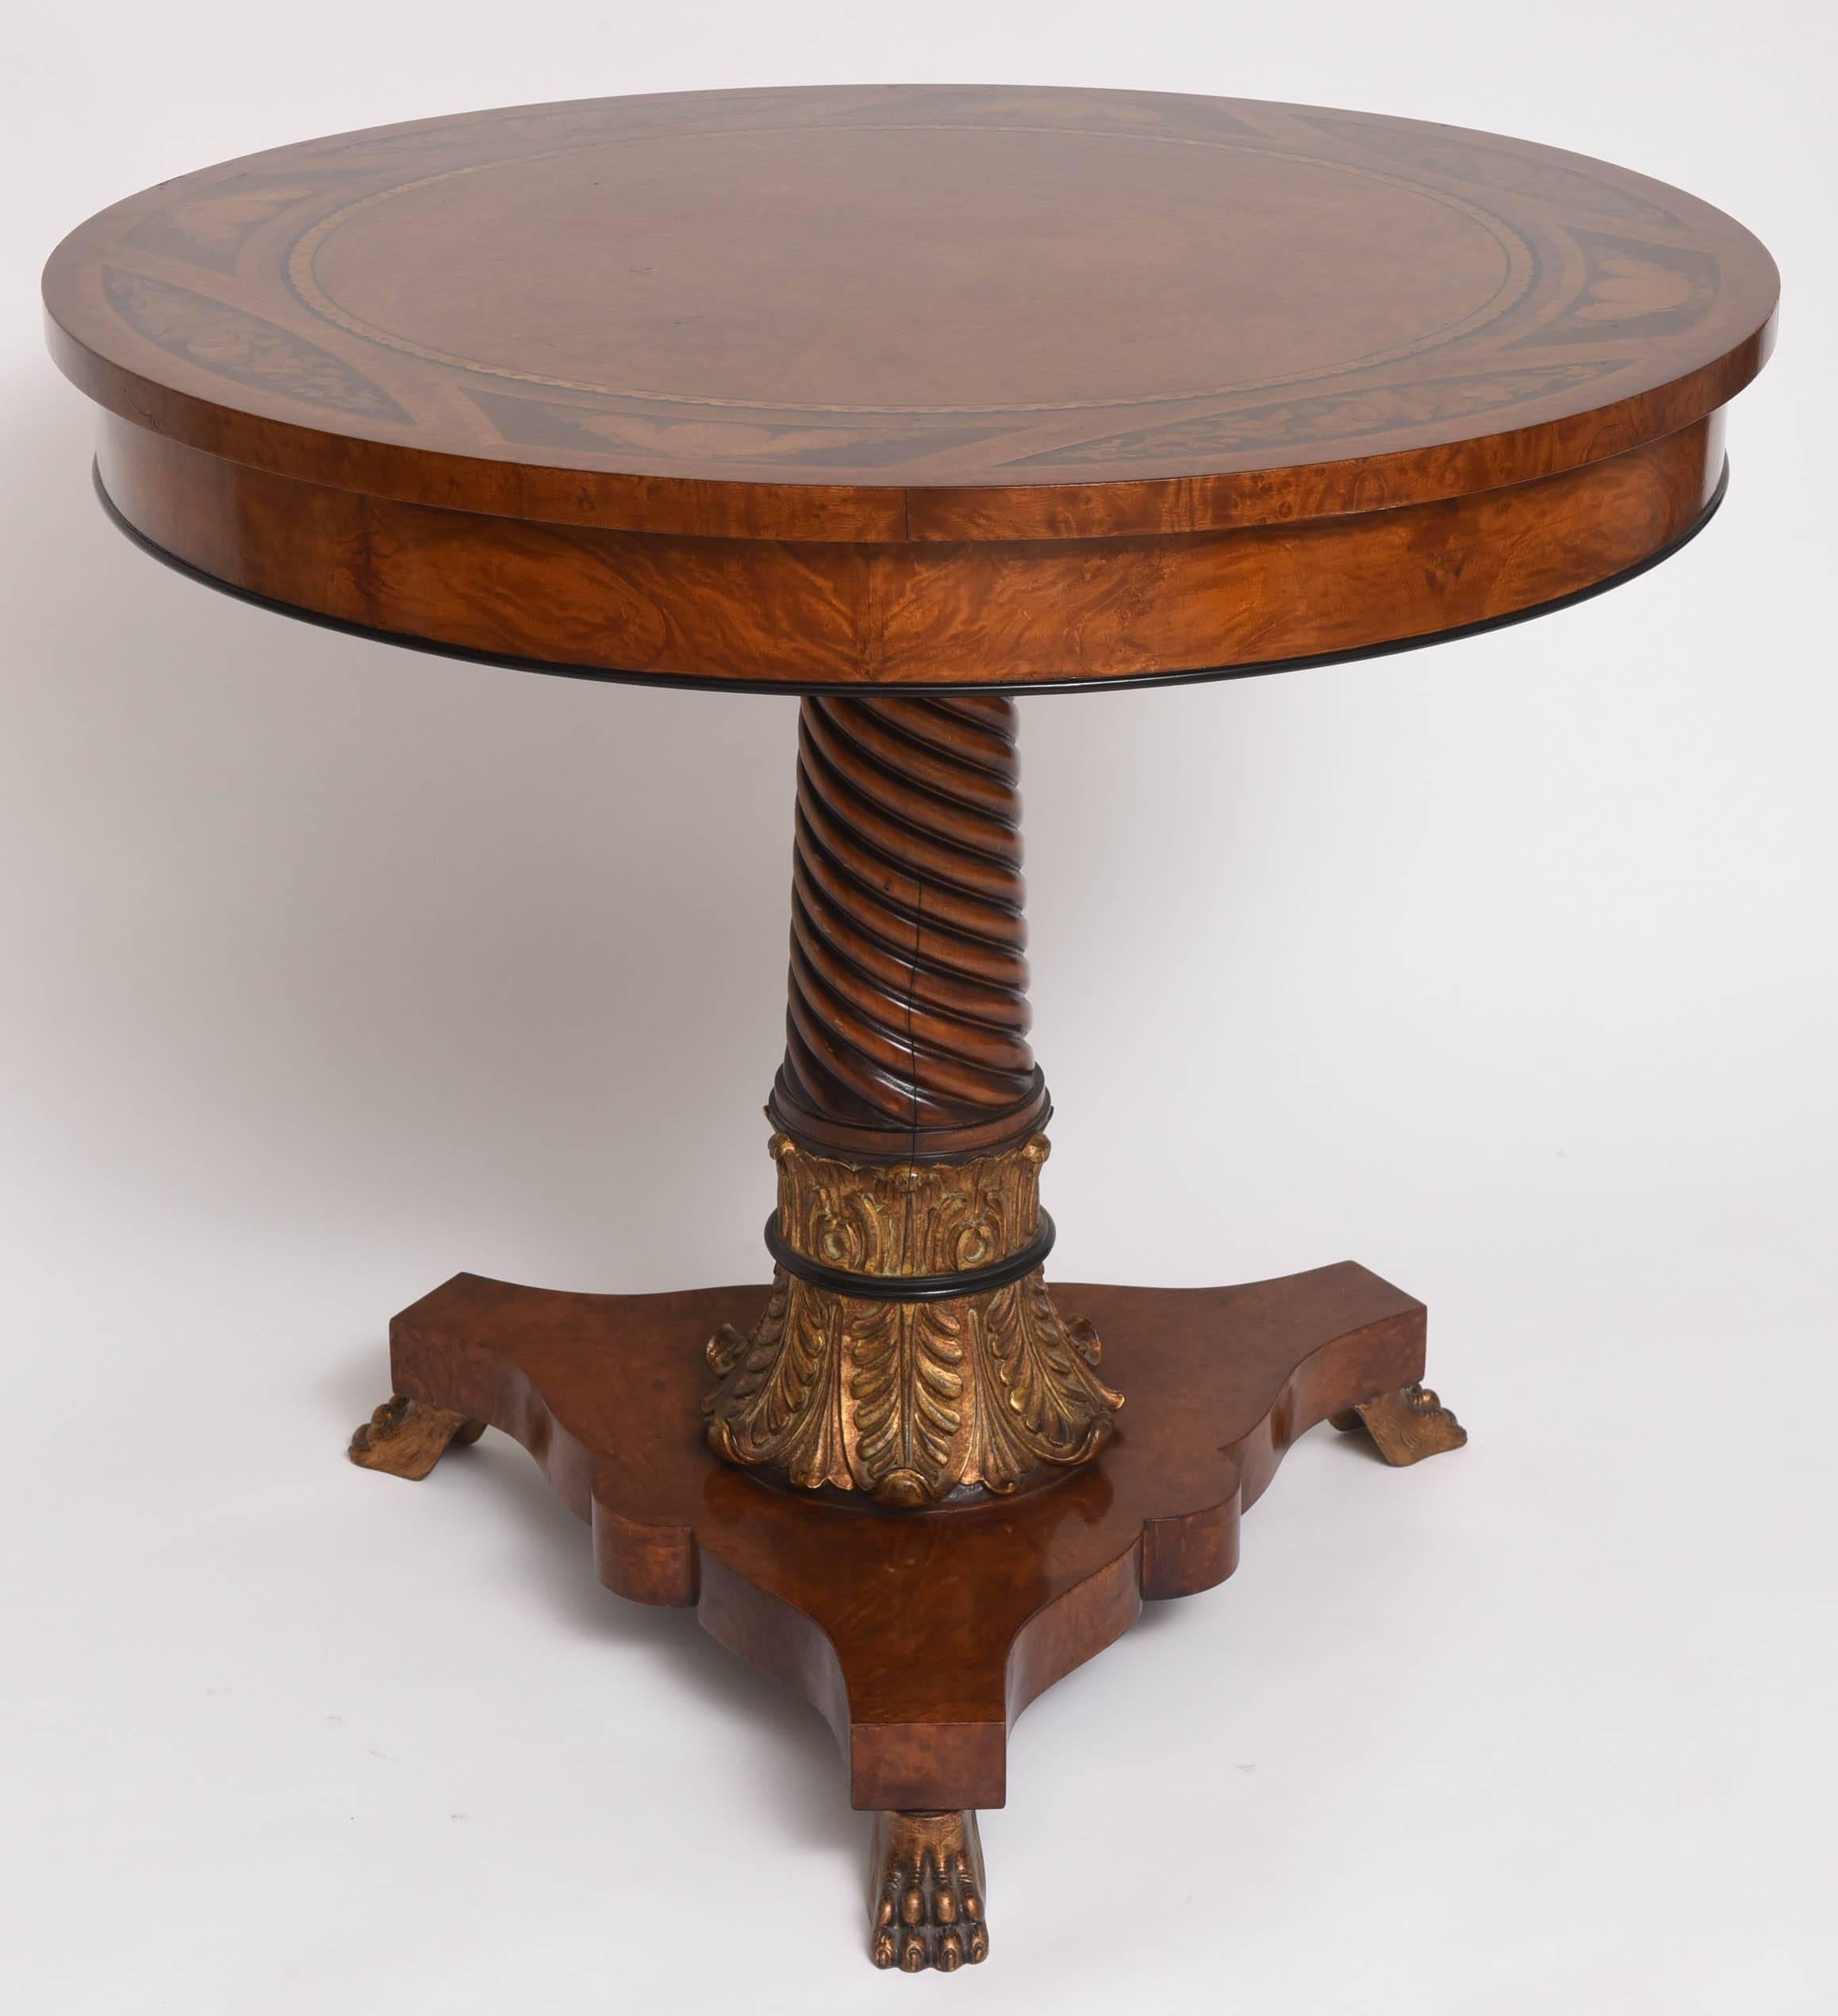 This handsome center table is from the iconic Italian furniture company Rho Mobili D' Epoca. The burled-wood top in inset with a geometric border, floral bouquets, clam shell's and sea-creatures. The spiraling central column is supported with